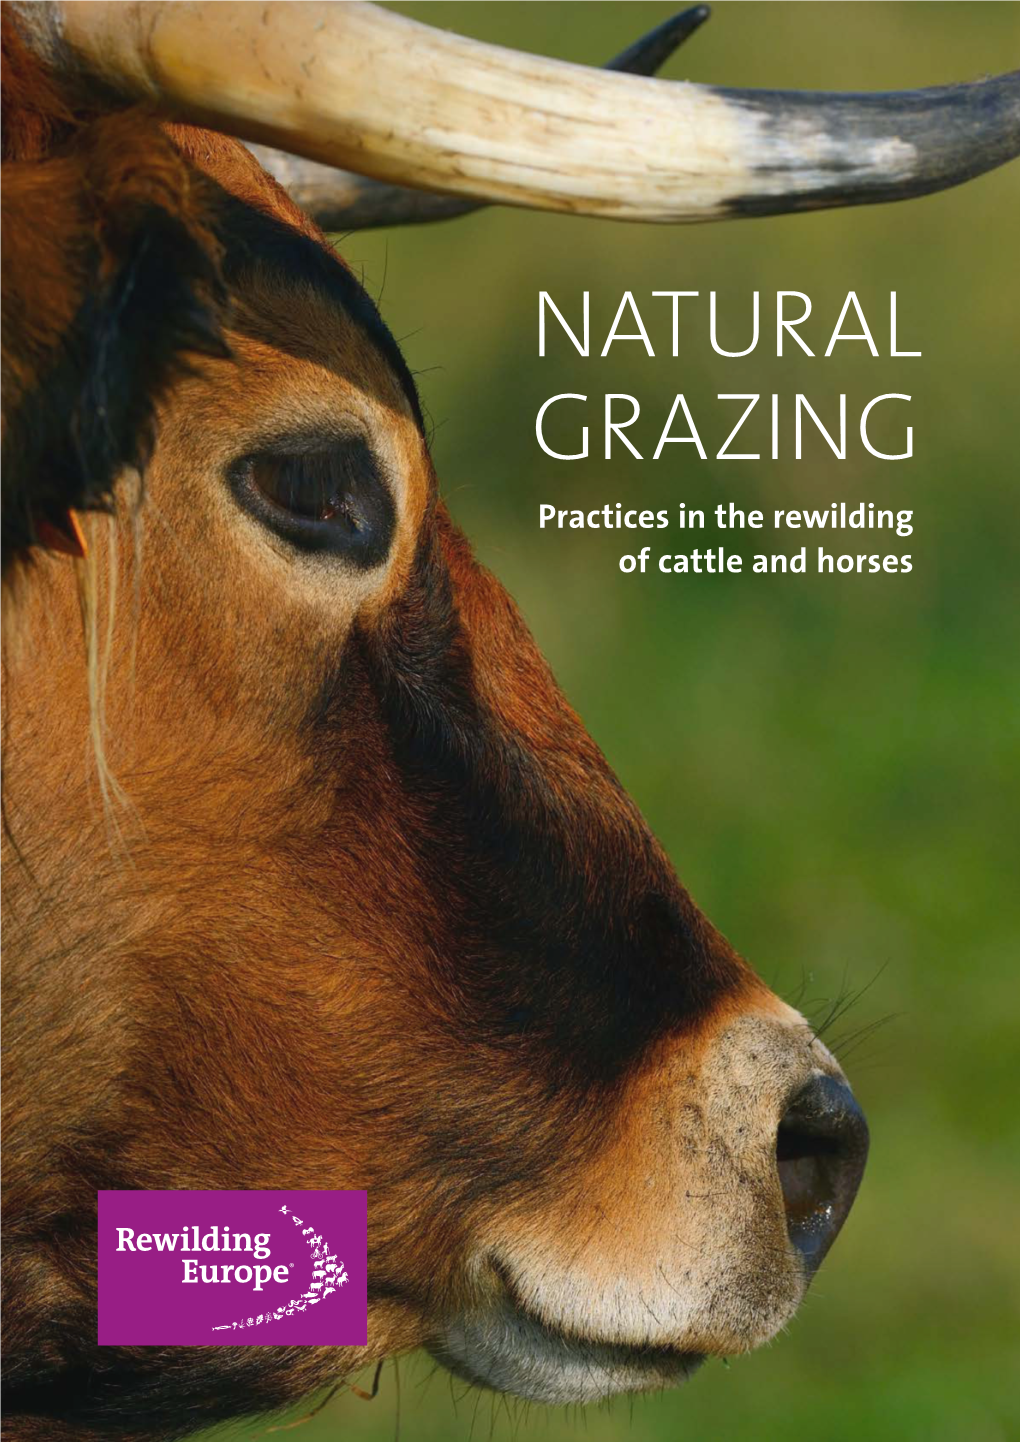 NATURAL GRAZING Practices in the Rewilding of Cattle and Horses Text Roeland Vermeulen / FREE Nature